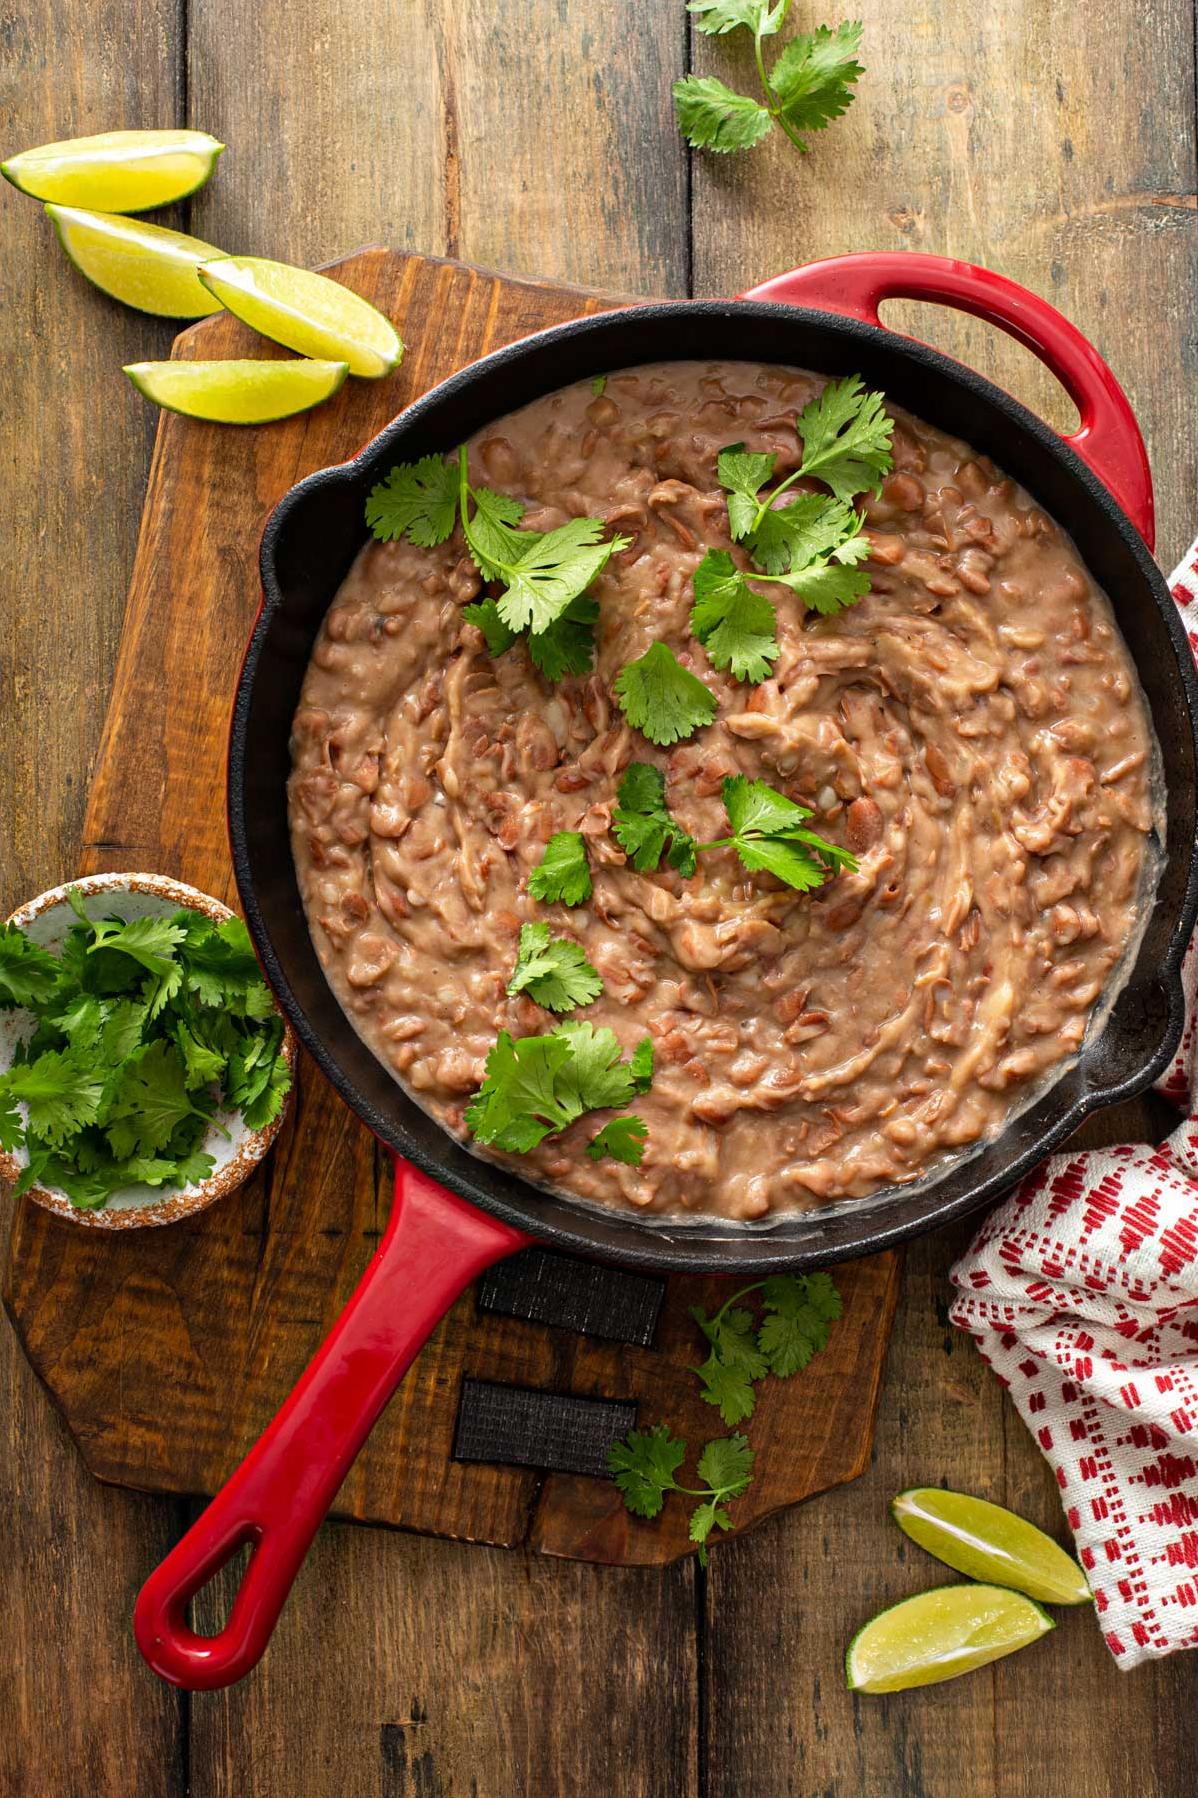  Not your average bean dip - this one is packed with fresh ingredients and mouth-watering flavor.